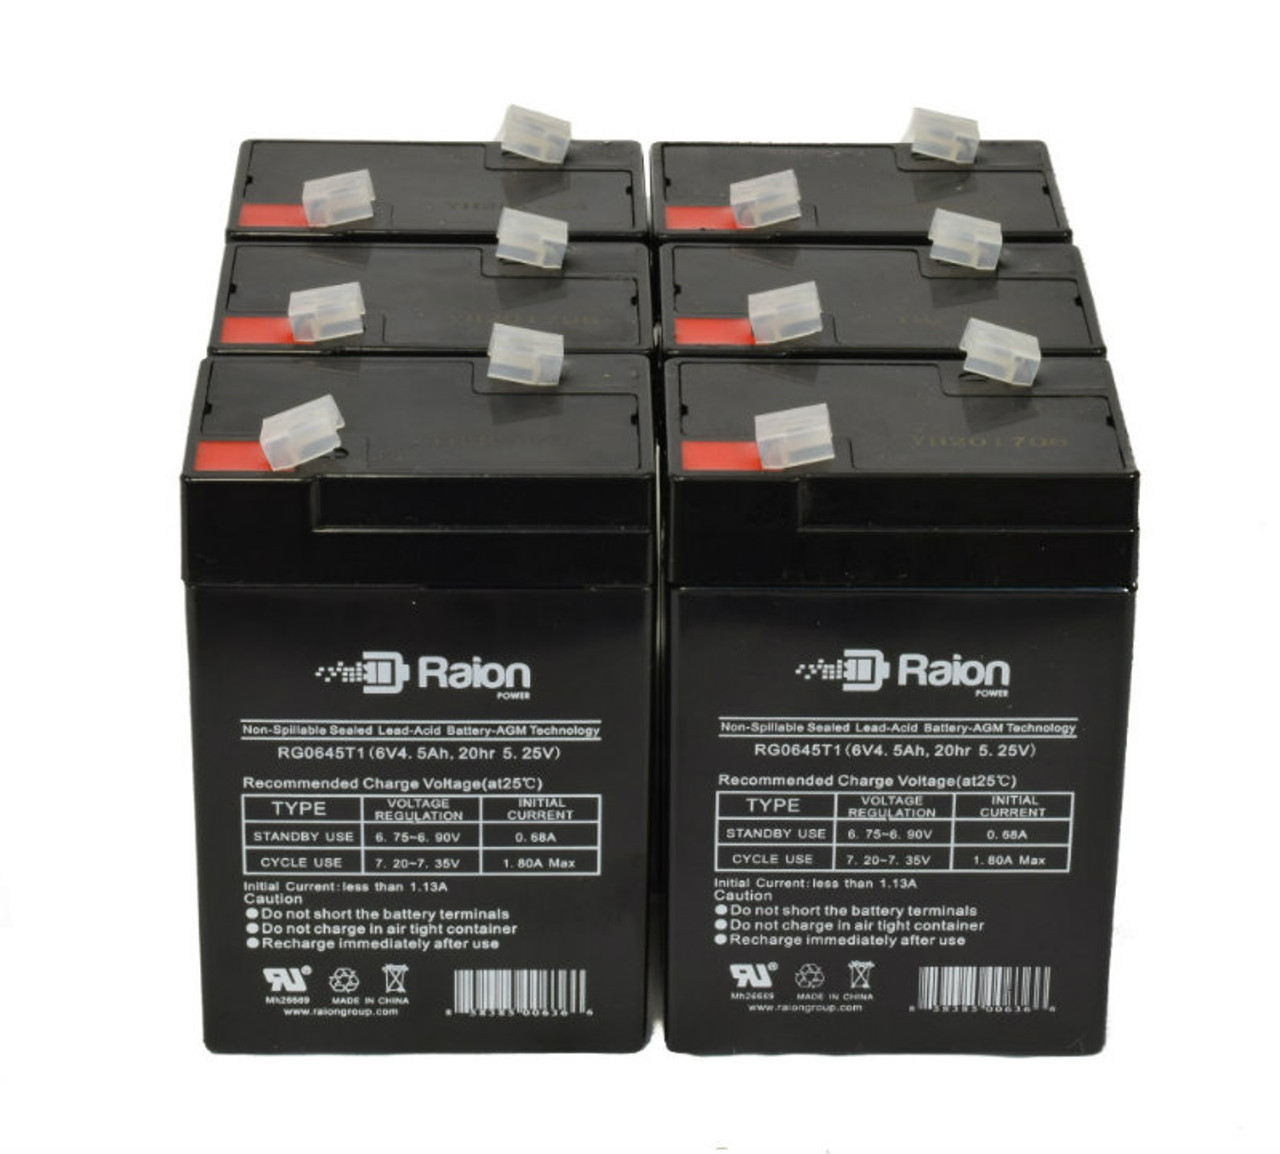 Raion Power 6 Volt 4.5Ah RG0645T1 Replacement Battery for Teledyne Big Beam 2ET6S5 - 6 Pack